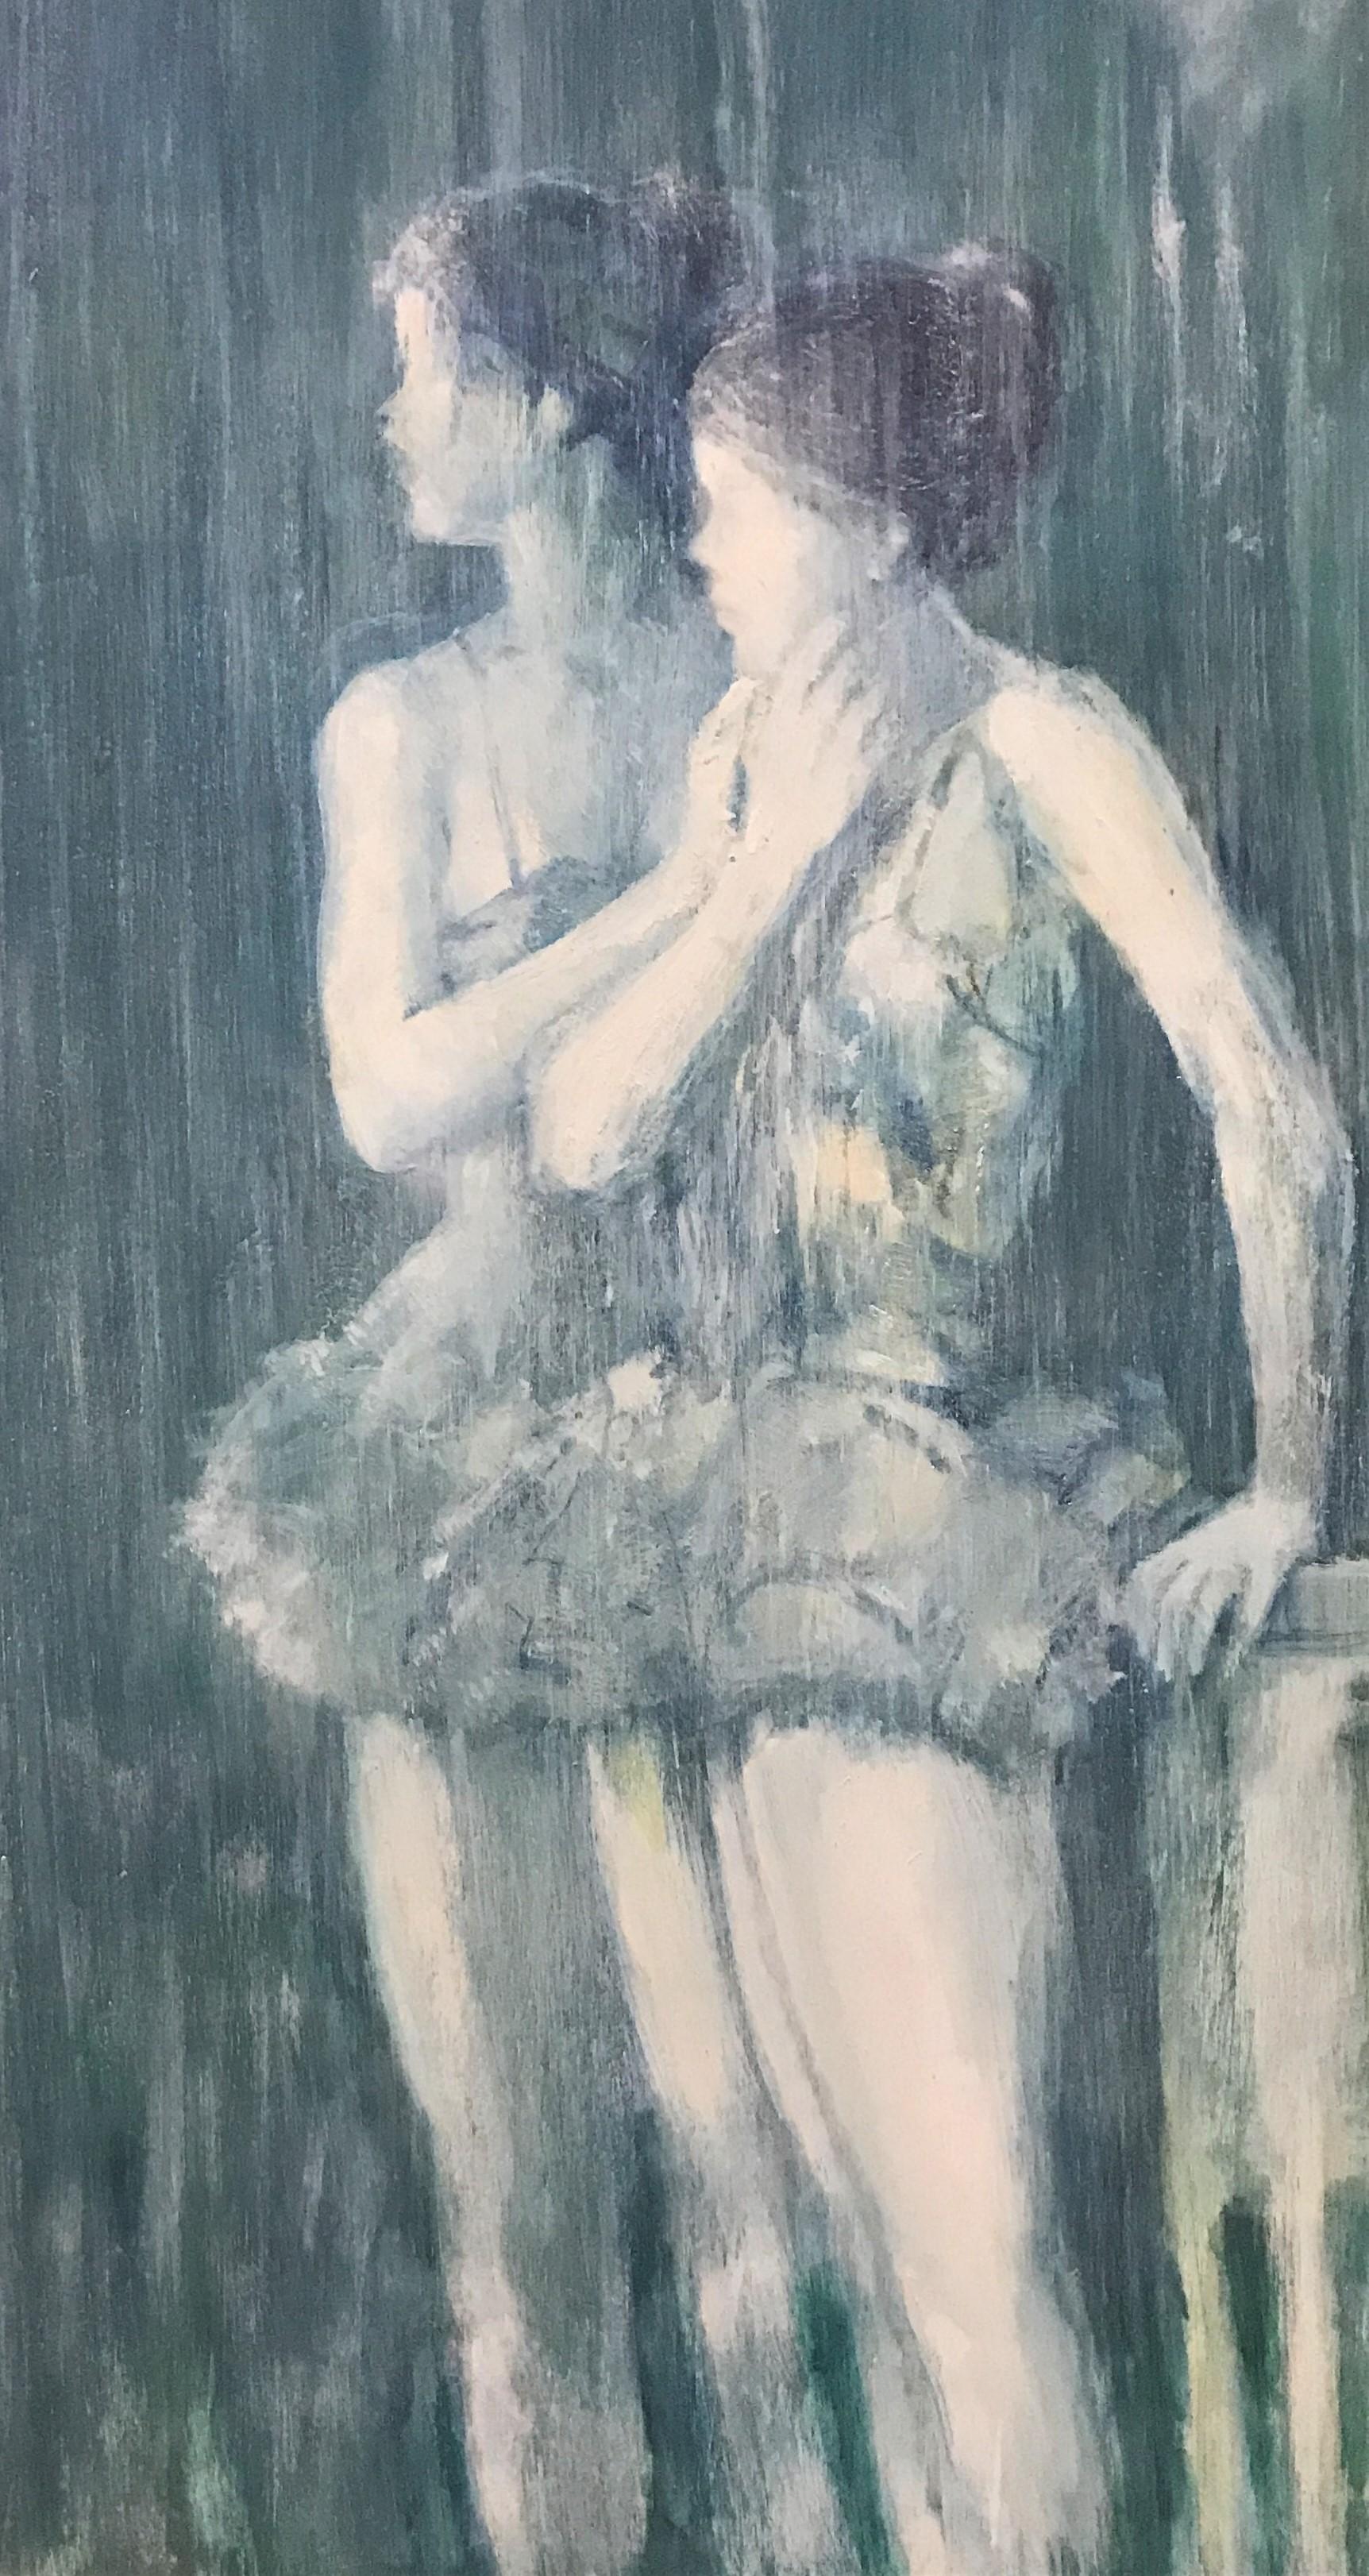 This is an original monochrome painting with a teal colour scheme by the artist Walter Rovira (b.1923). This work is an impressionist oil on board painting of a pair of Ballet dancers that is circa the 20th century.         
There is no public